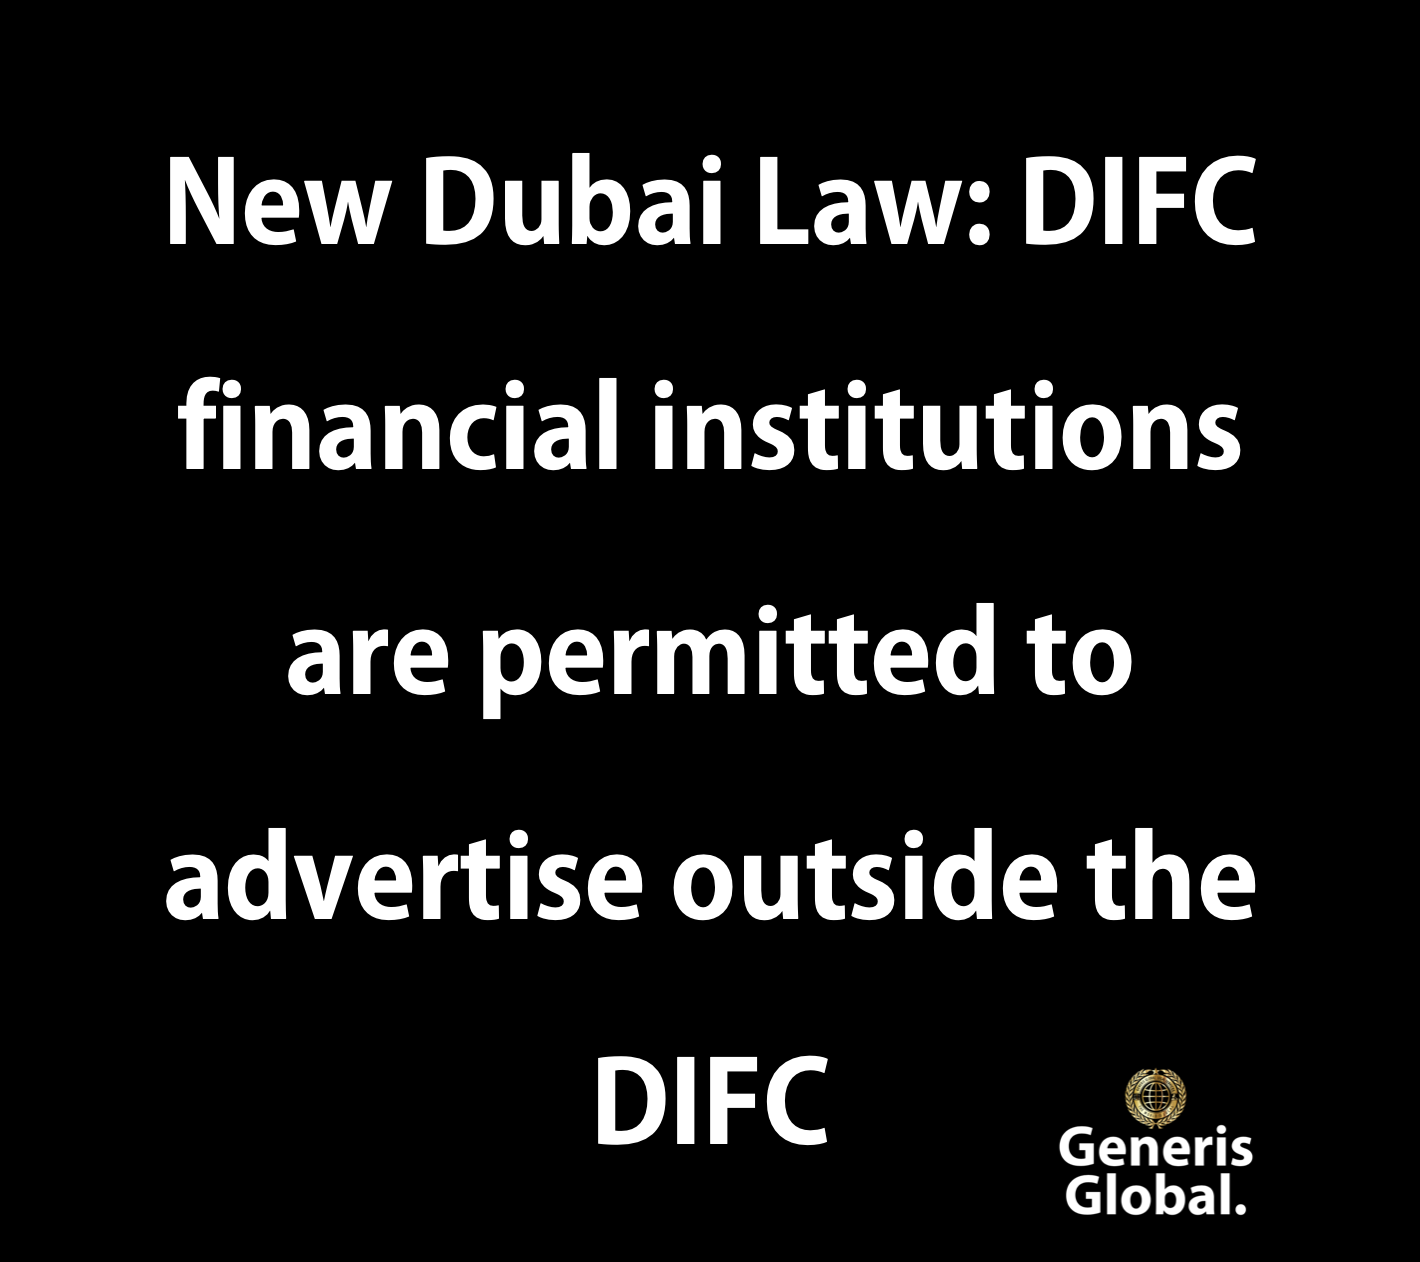 New Dubai Law: DIFC financial institutions are permitted to advertise outside the DIFC